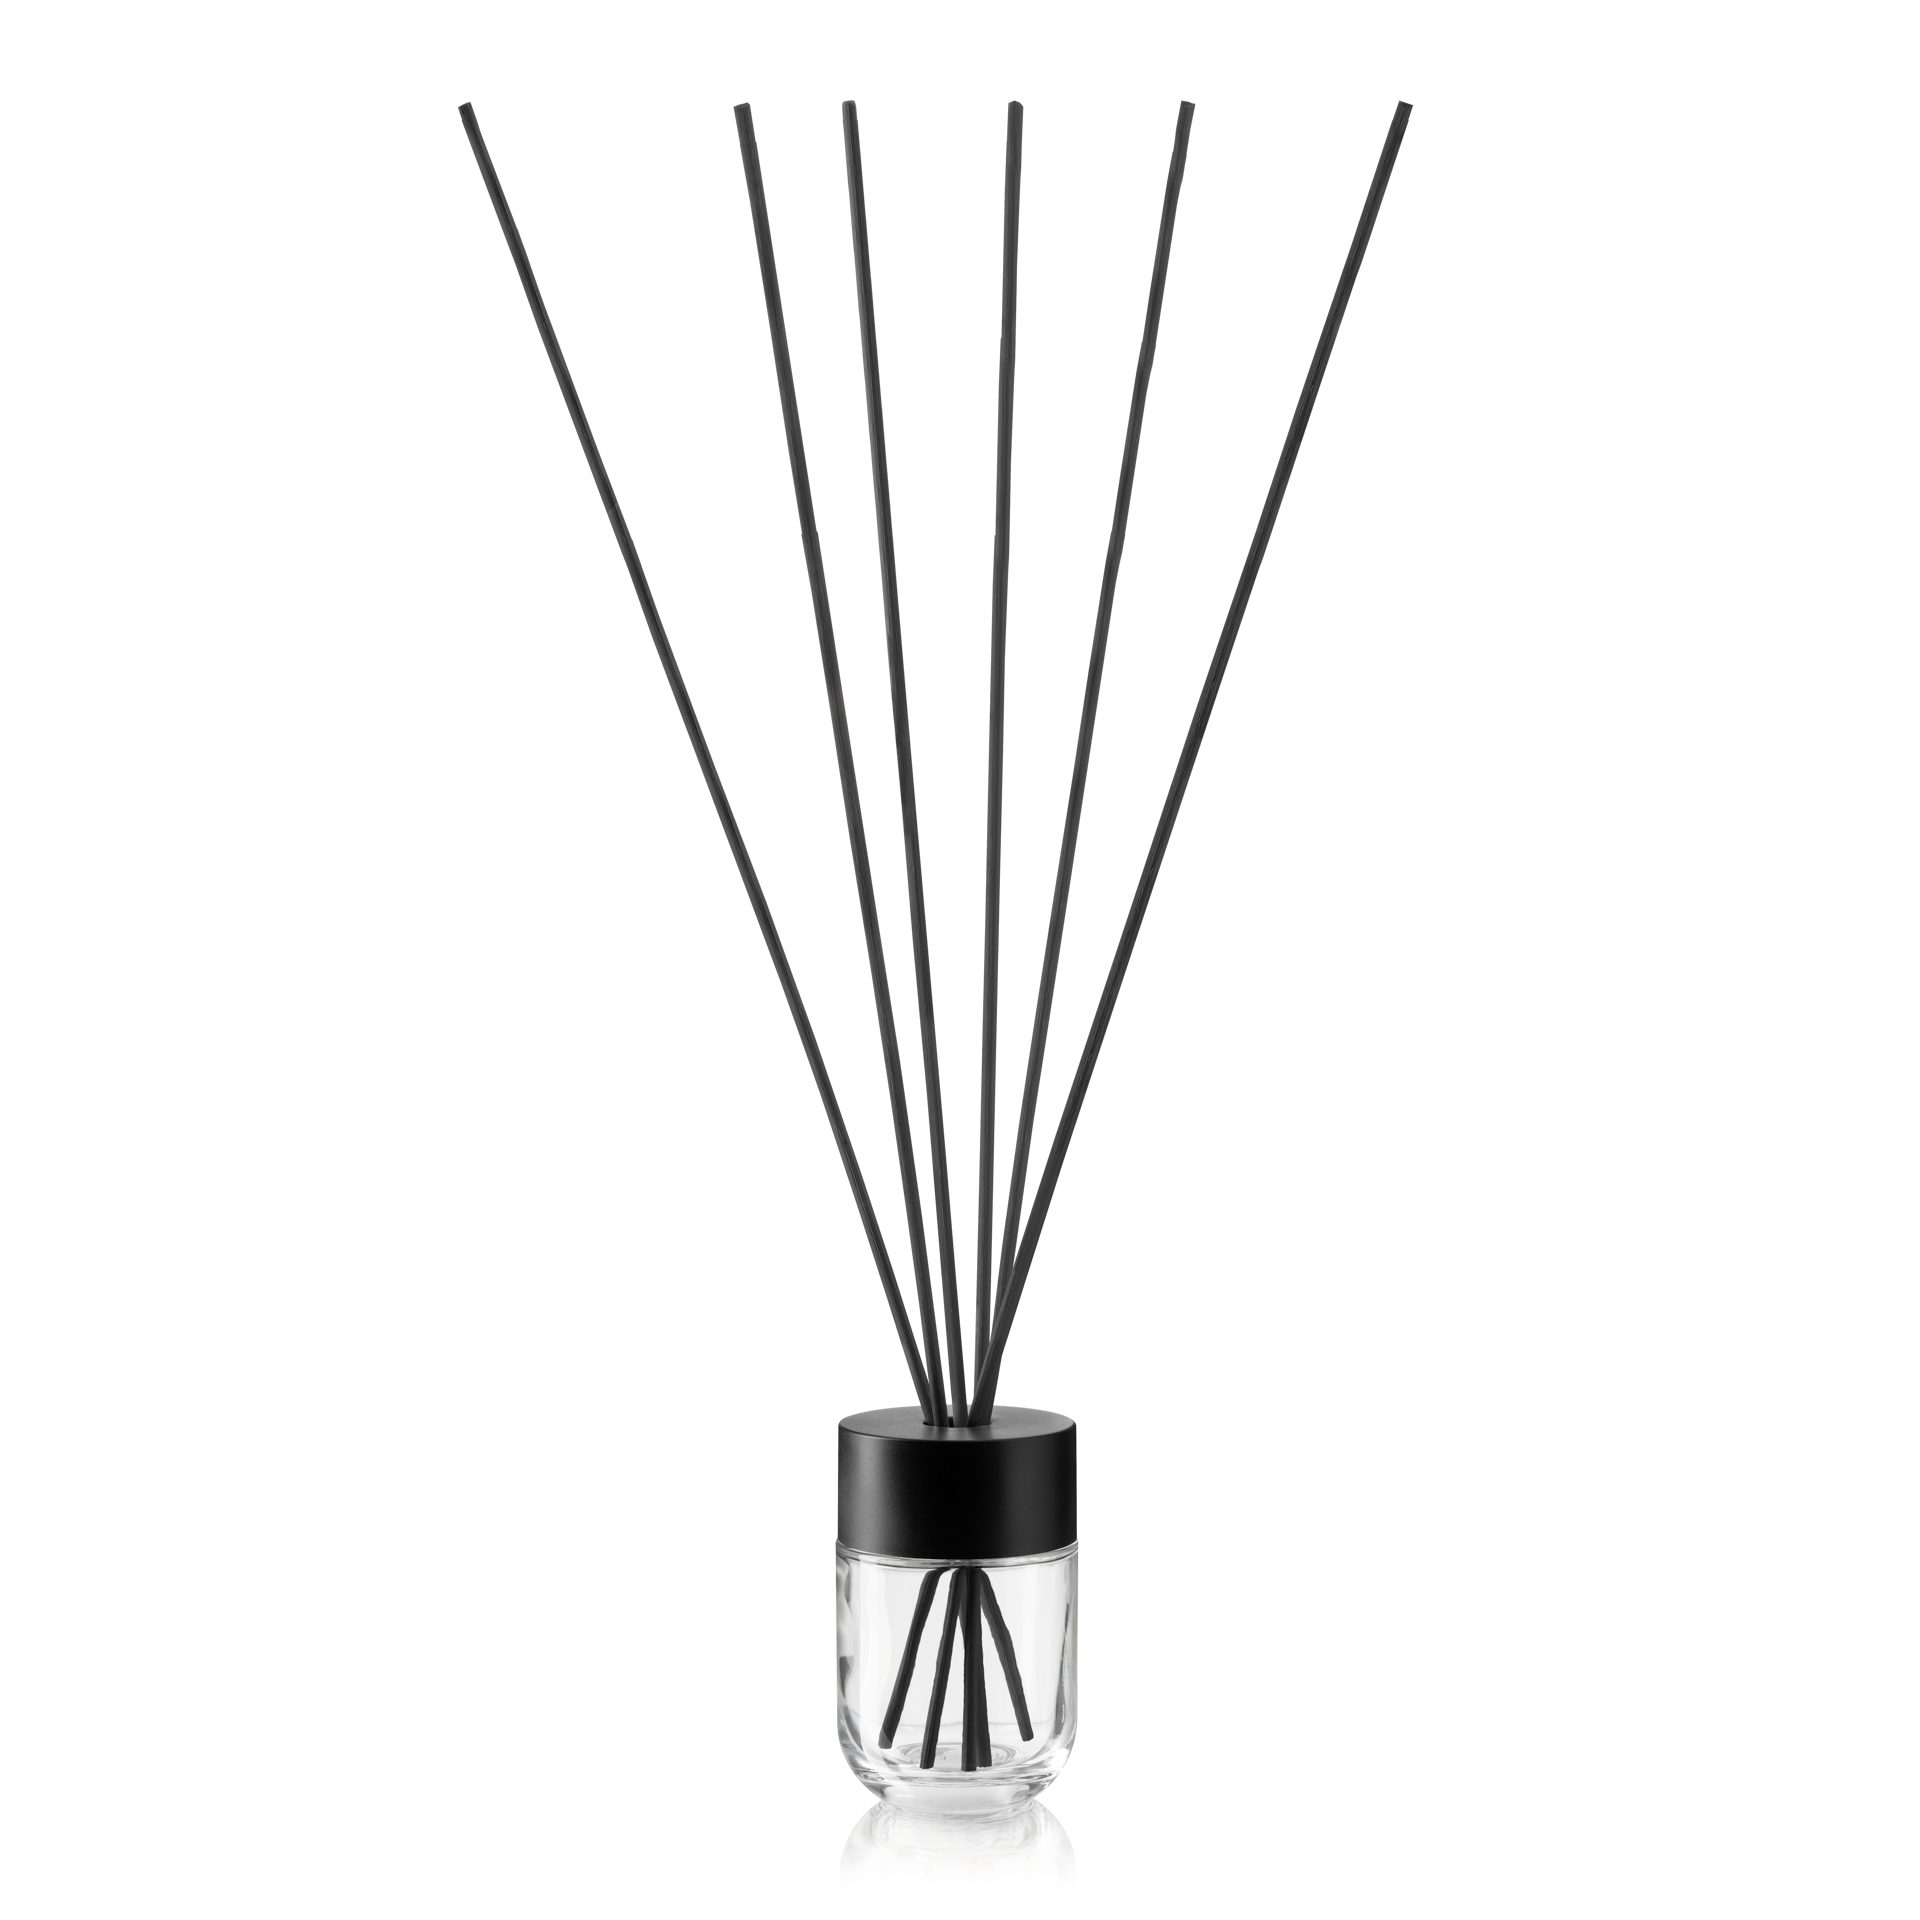 Diffuser sticks, rattan, black matte Type B, 3.5mm thick, 400mm, packed in bundles of 6 pieces